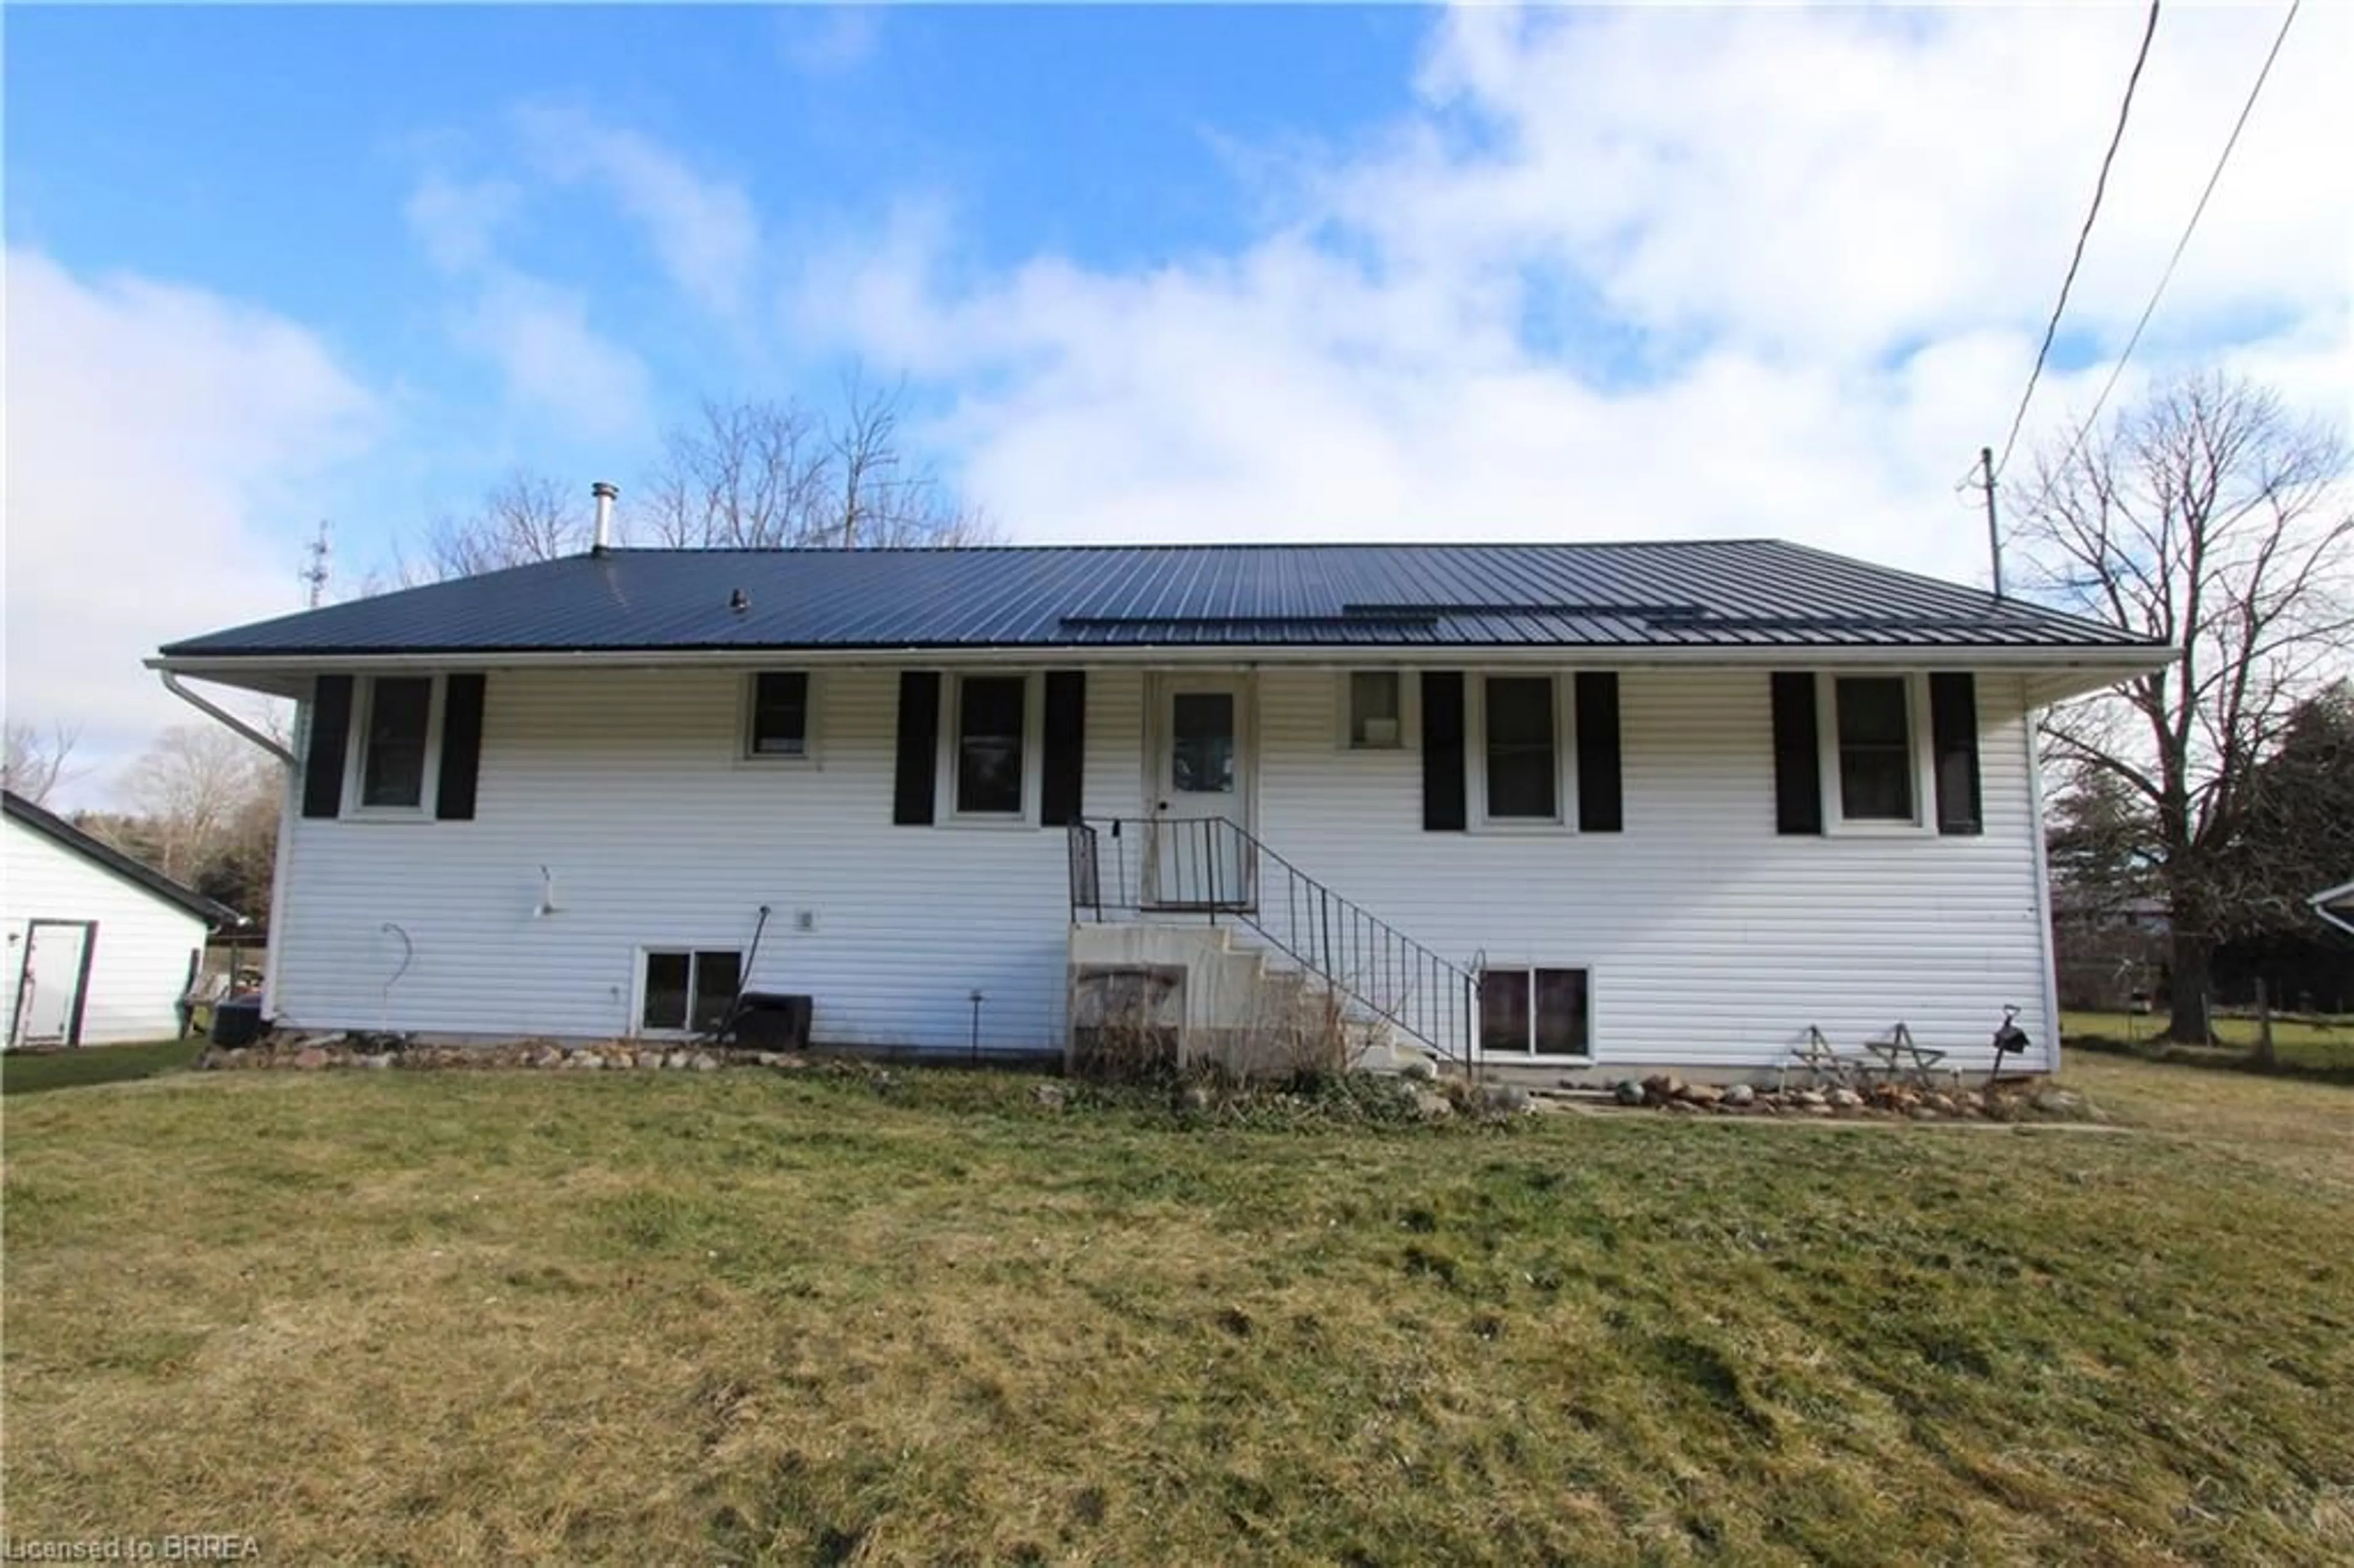 Frontside or backside of a home for 2492 Pinegrove Rd, Delhi Ontario N4B 2E6